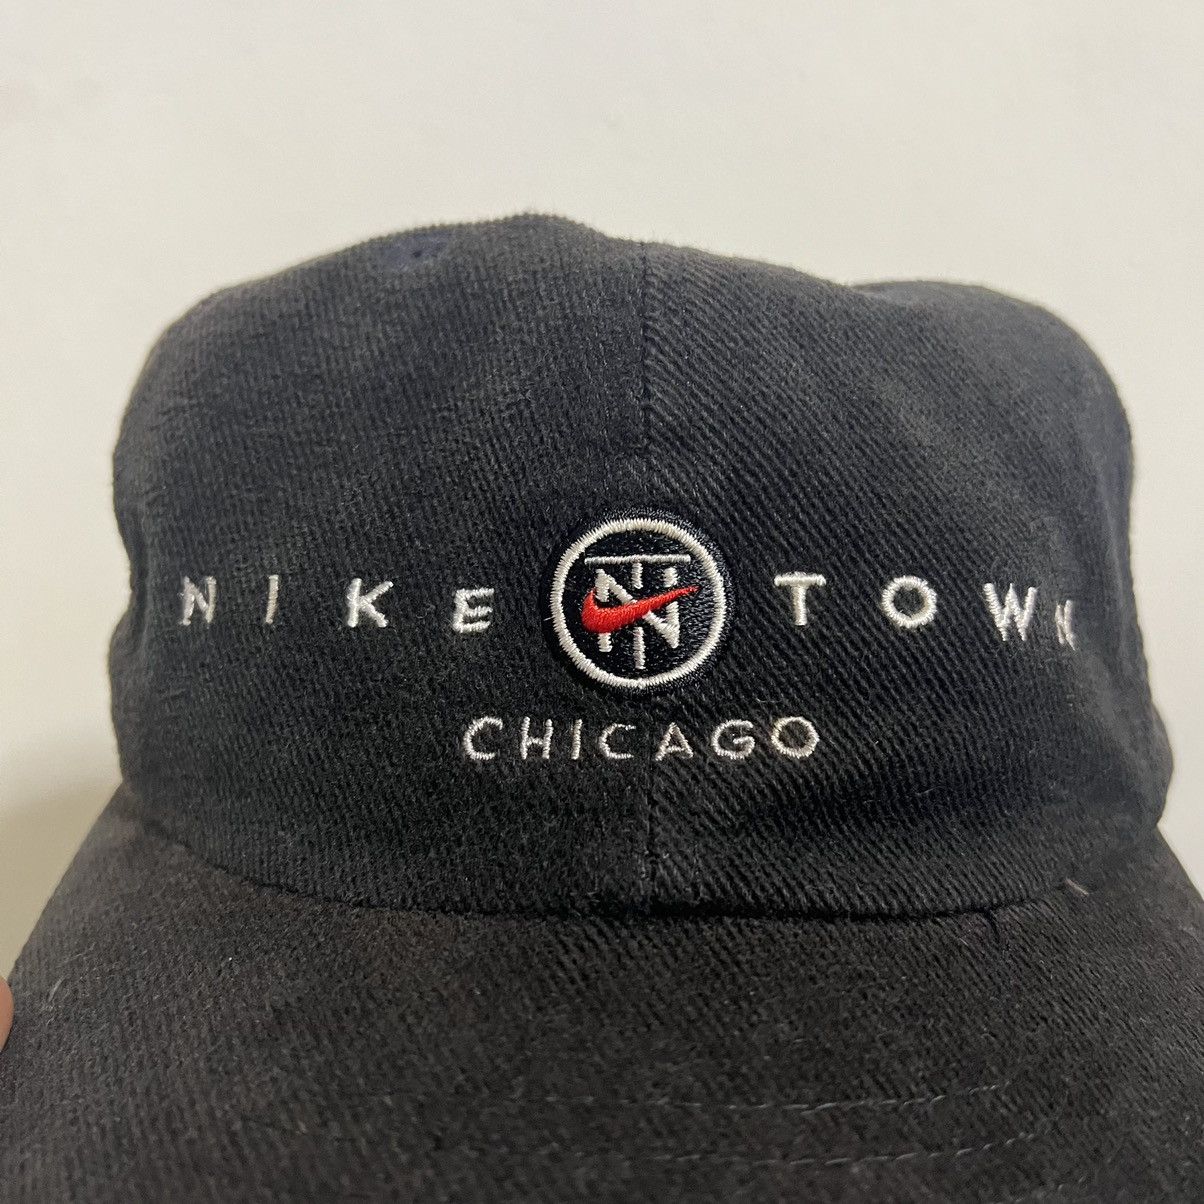 Vintage Nike Town Chicago hat - 2